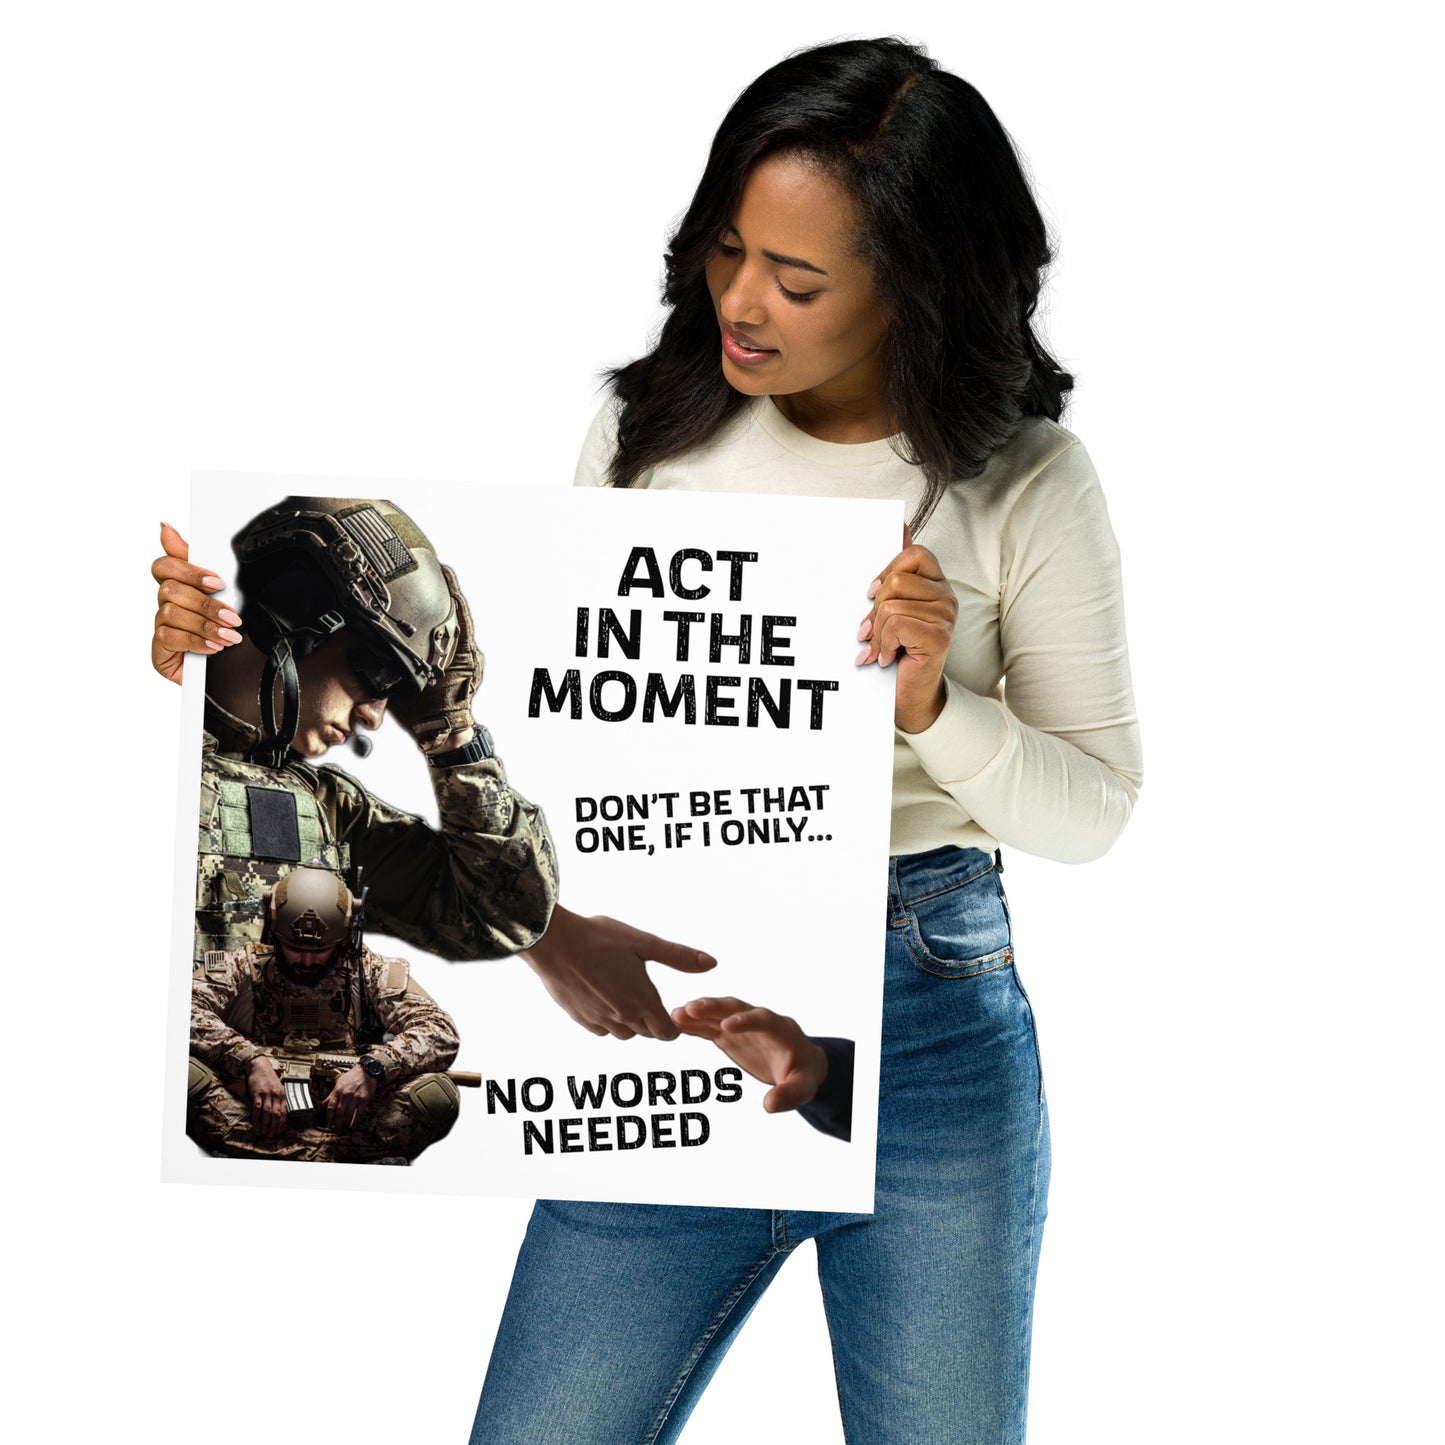 Act in the Moment 954 Signature Poster